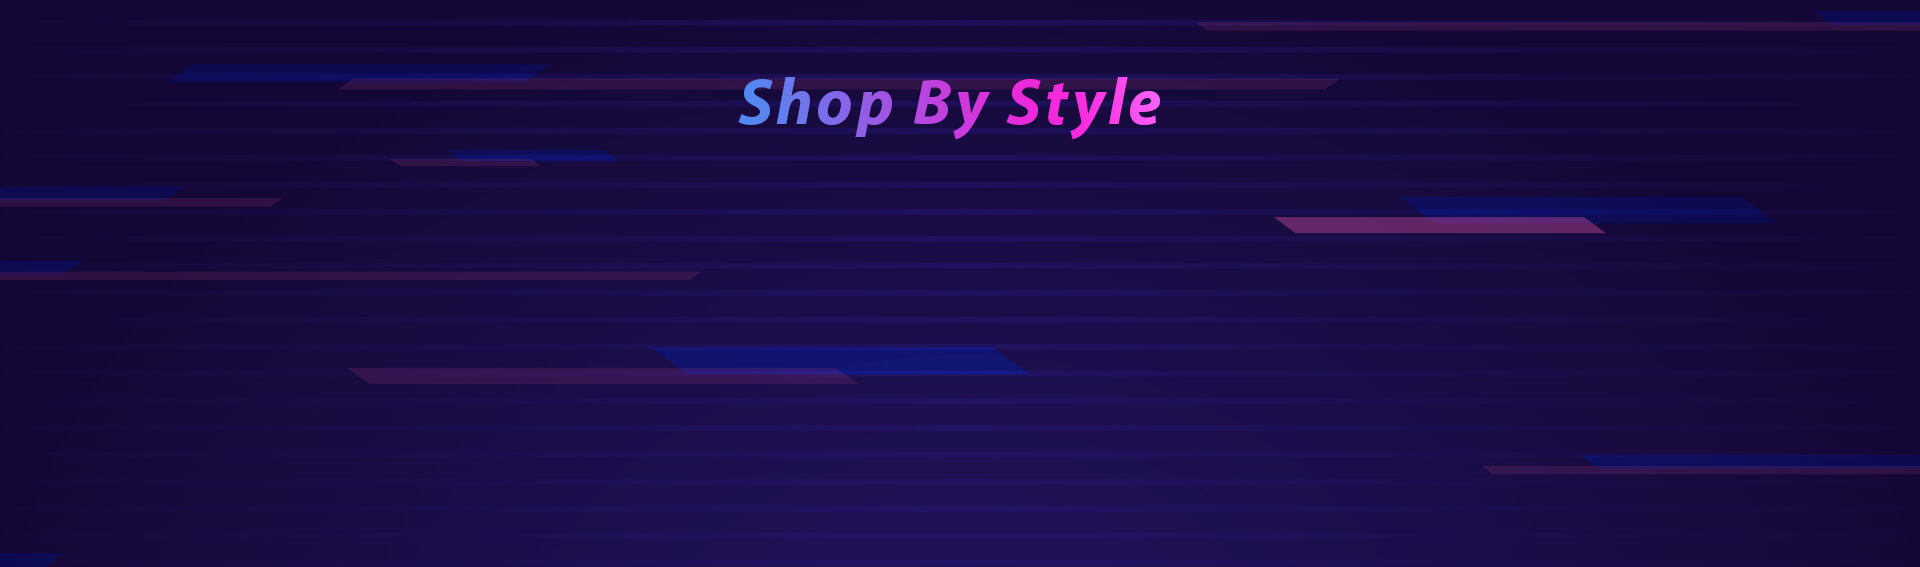 Shop By Style